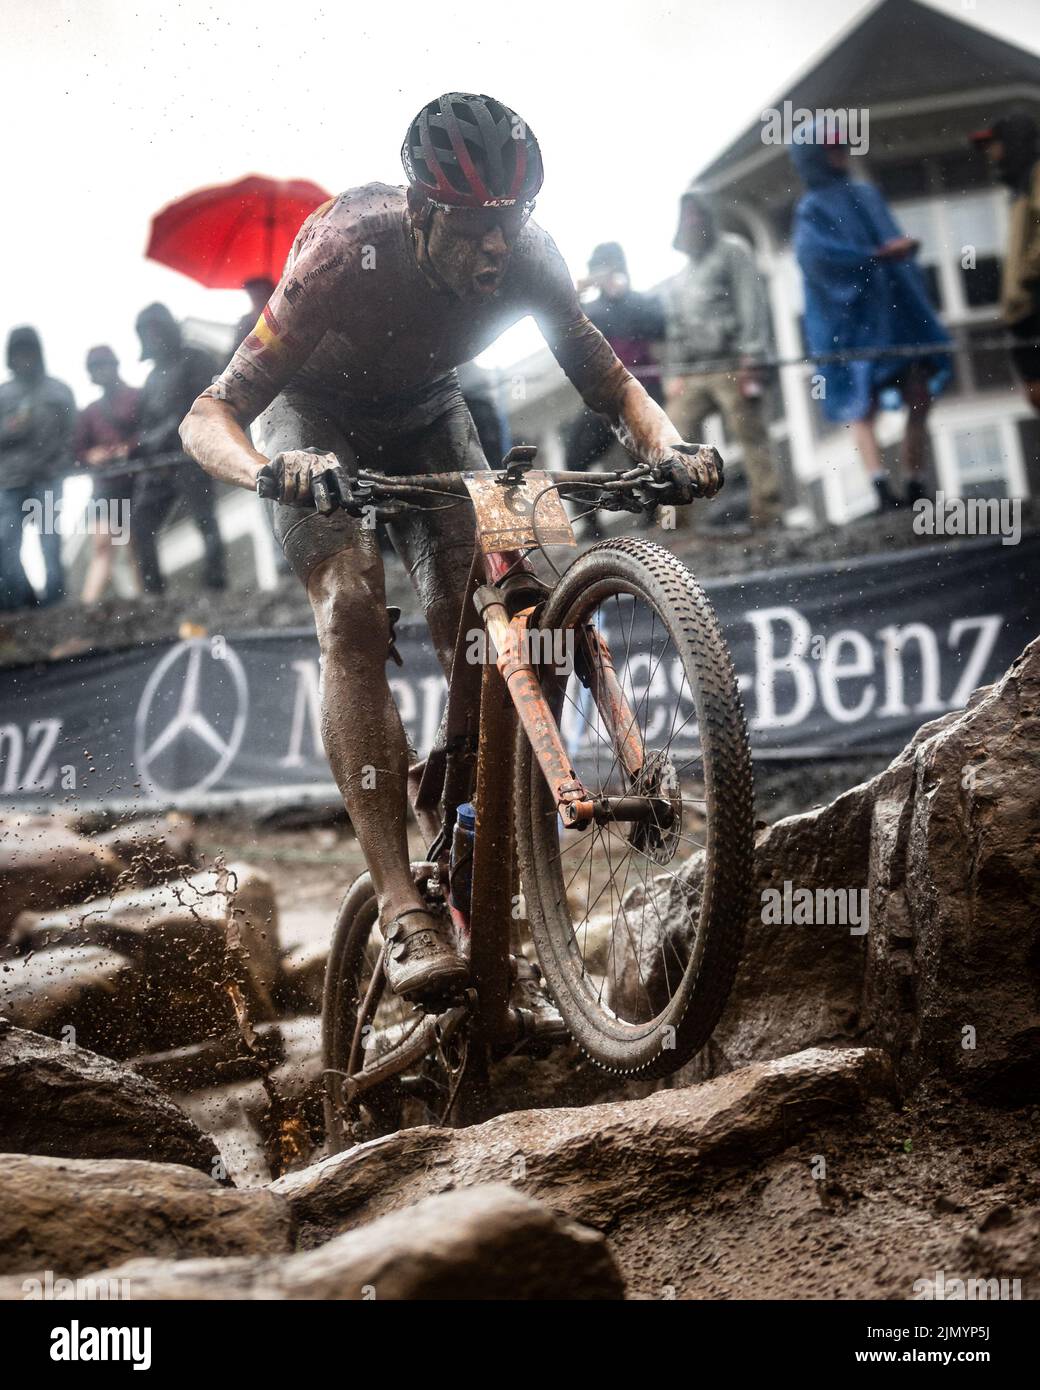 David Valero Serrano of Spain in action during the Mercedes Benz UCI Mountain Bike World Cup cross-country in Snowshoe, West Viriginia, USA, July 31, Stock Photo